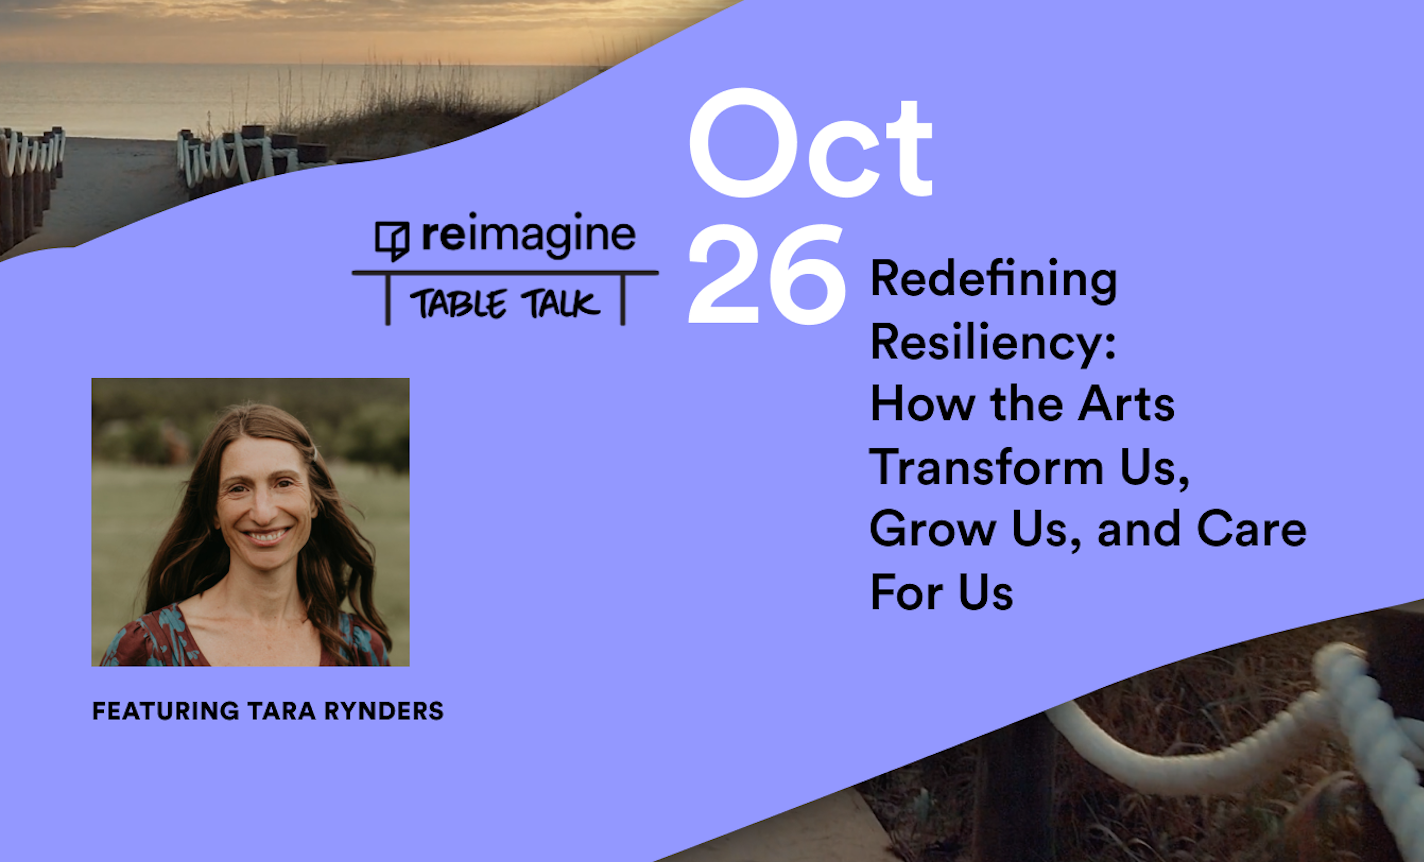 Redefining Resiliency: How the Arts Transform Us, Grow Us, and Care For Us